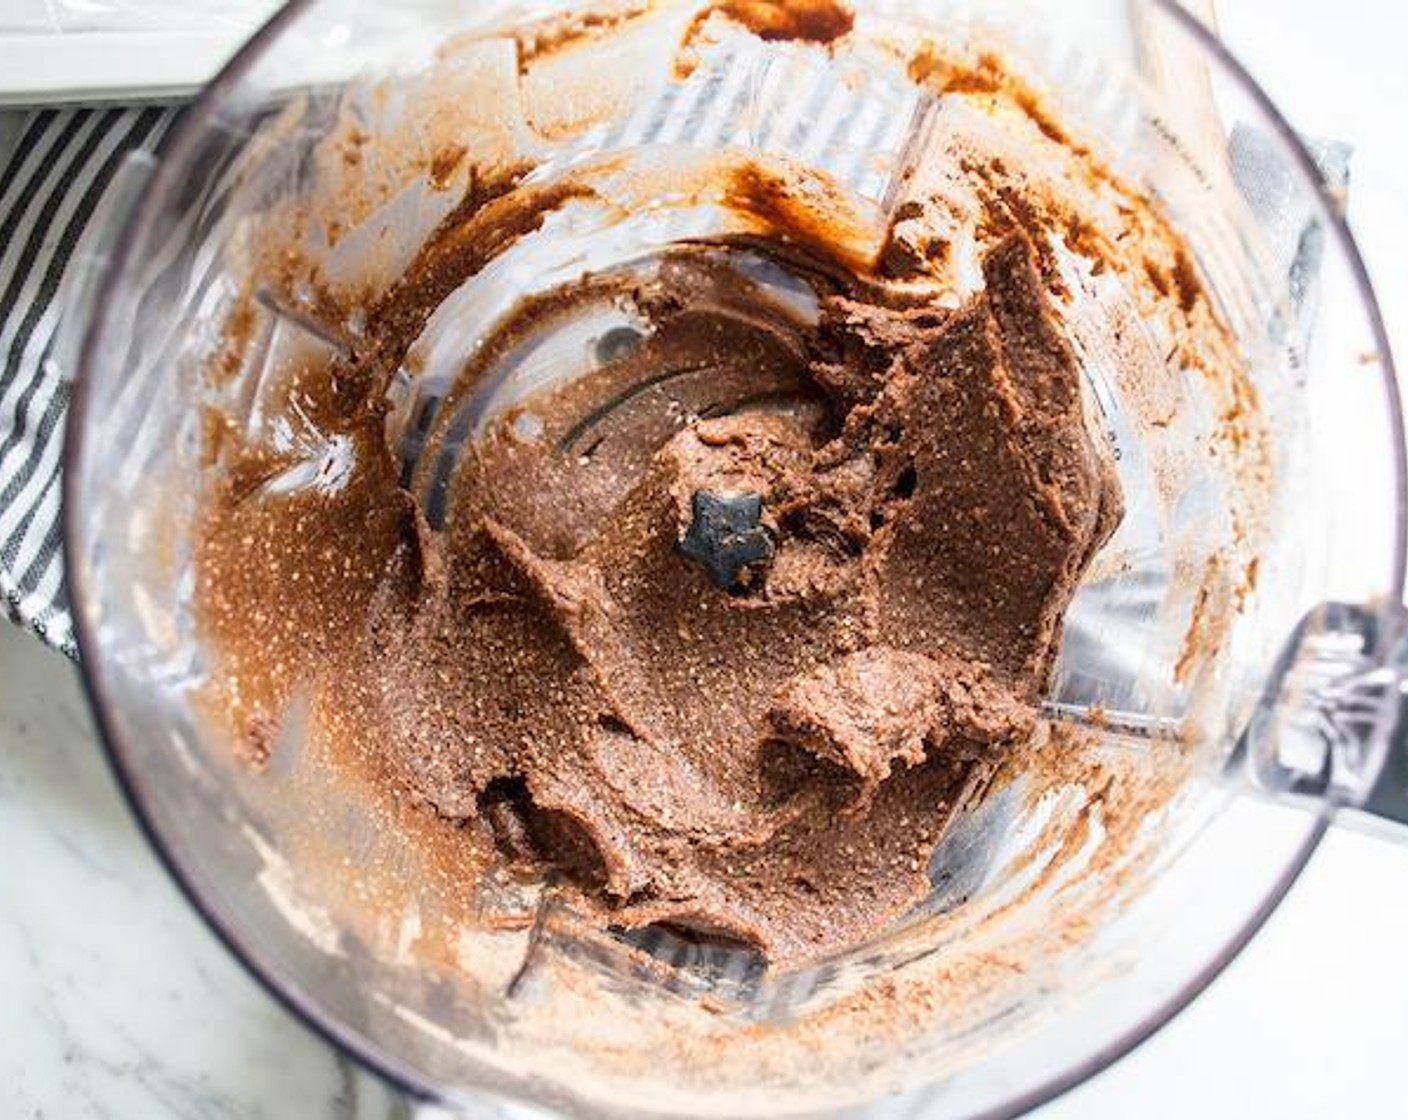 step 1 Add Raw Cashews (1/2 cup), Medjool Dates (14), Dry Roasted, Unsalted Peanuts (1/4 cup), Unsweetened Cocoa Powder (1/4 cup), and Peanut Butter (2 Tbsp) to bowl of food processor, blend for 1 minute.